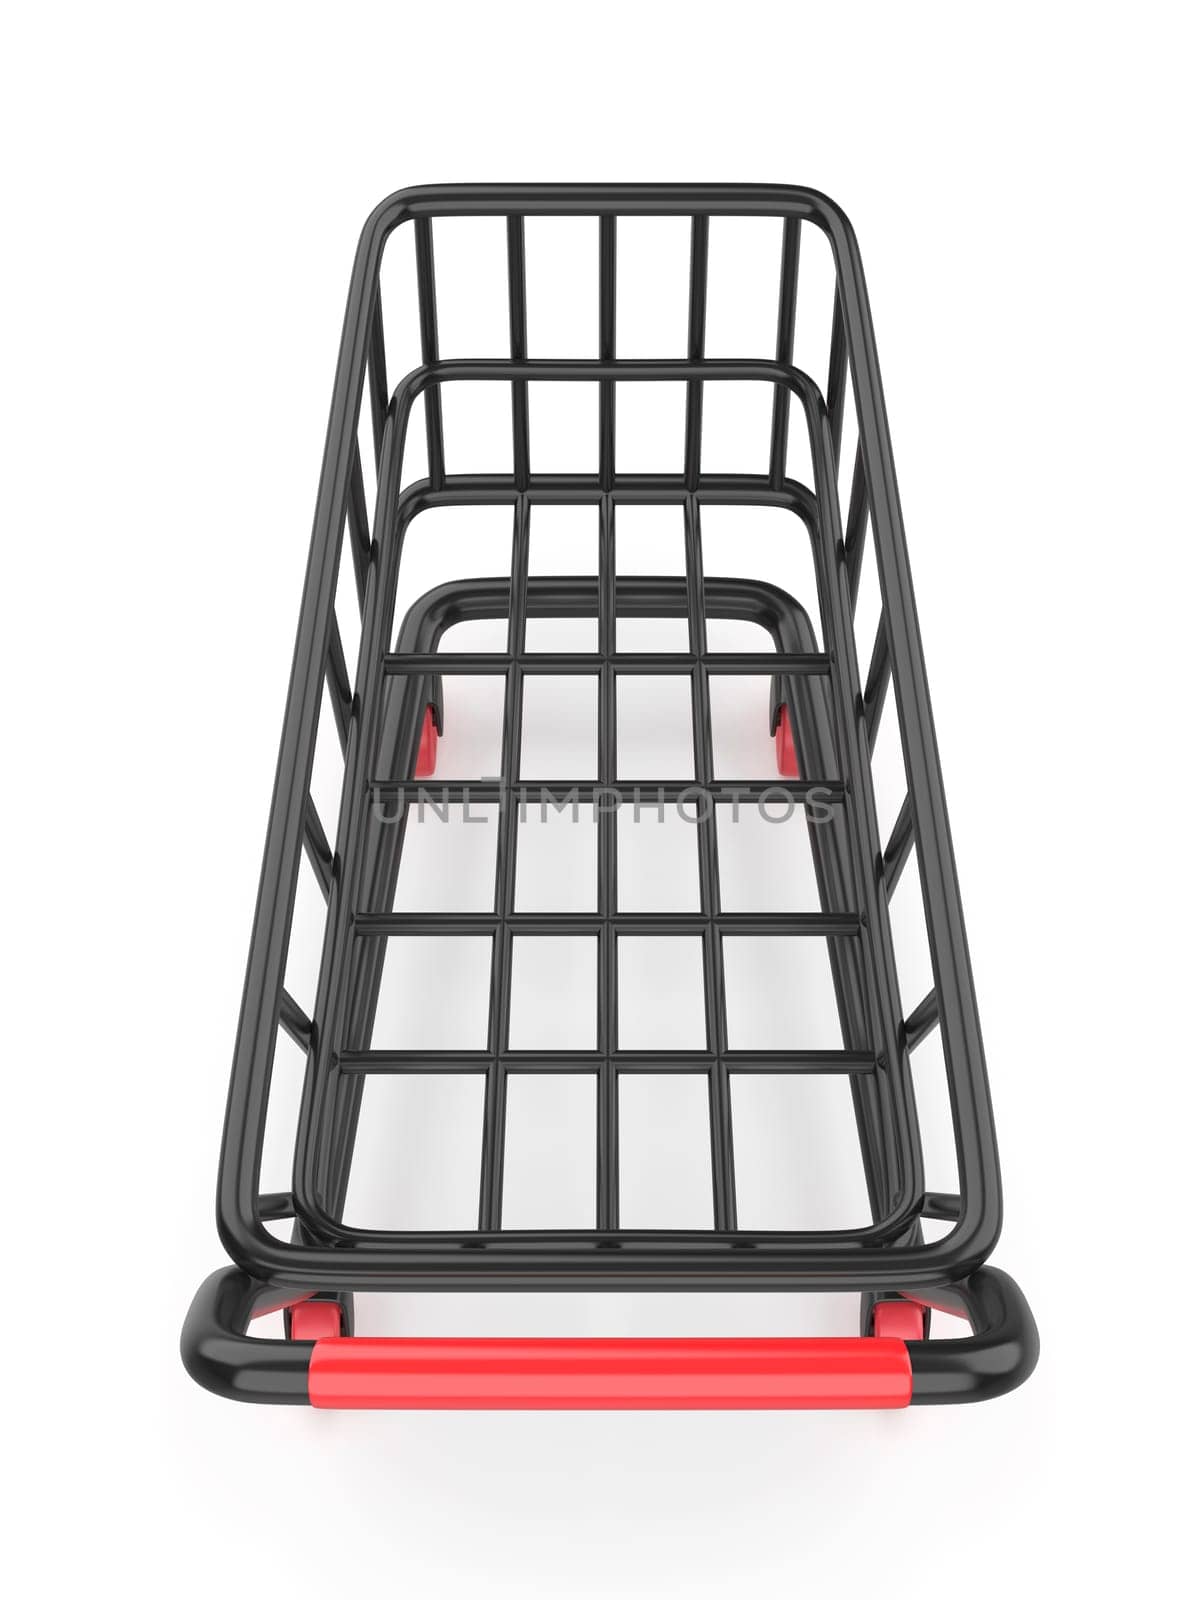 Black empty shopping cart on white background, top view